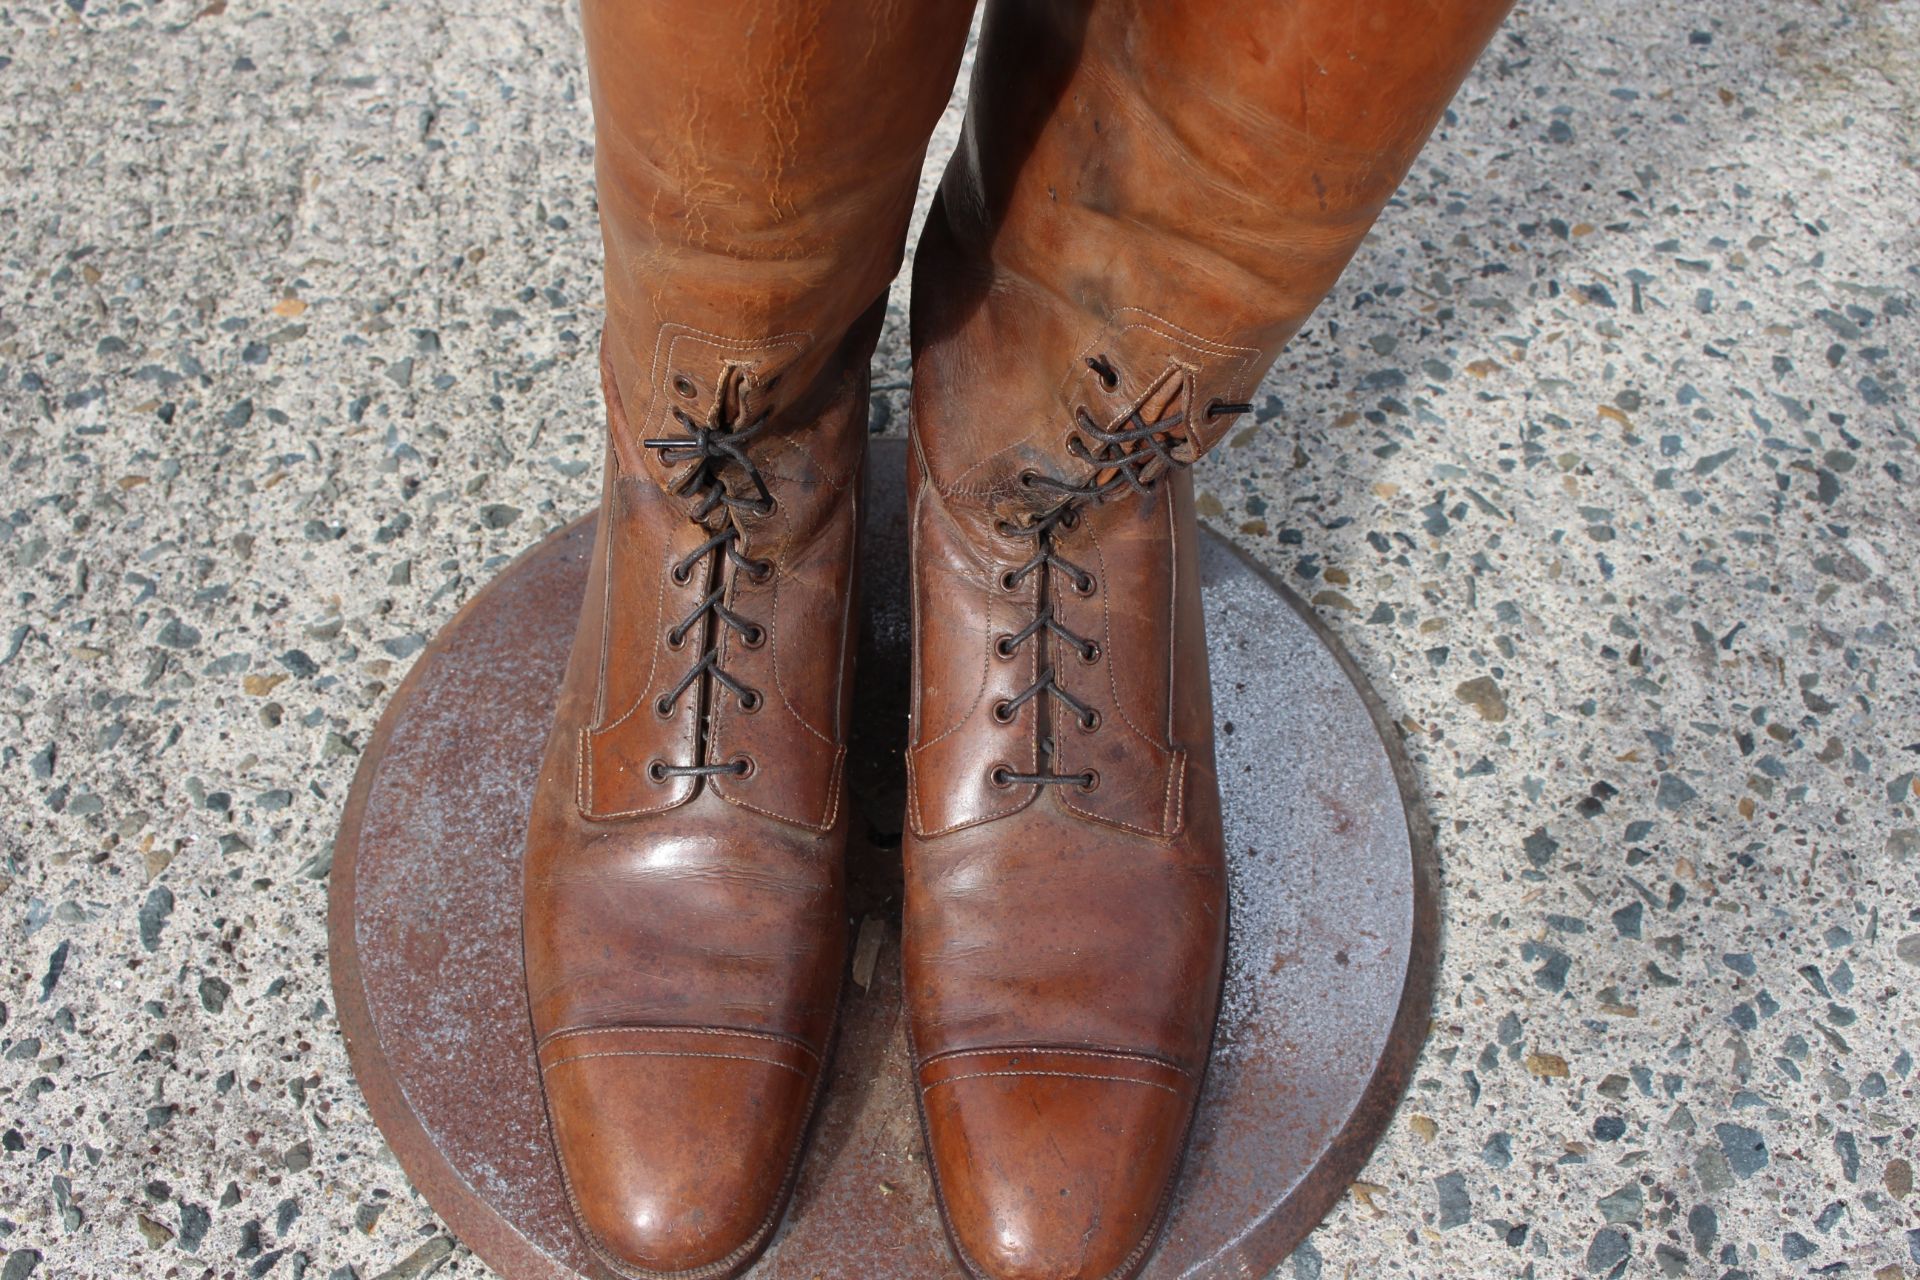 leather tan shop desplay boots on stainless steel stand with Morland's woods  H:51CM - Image 3 of 4